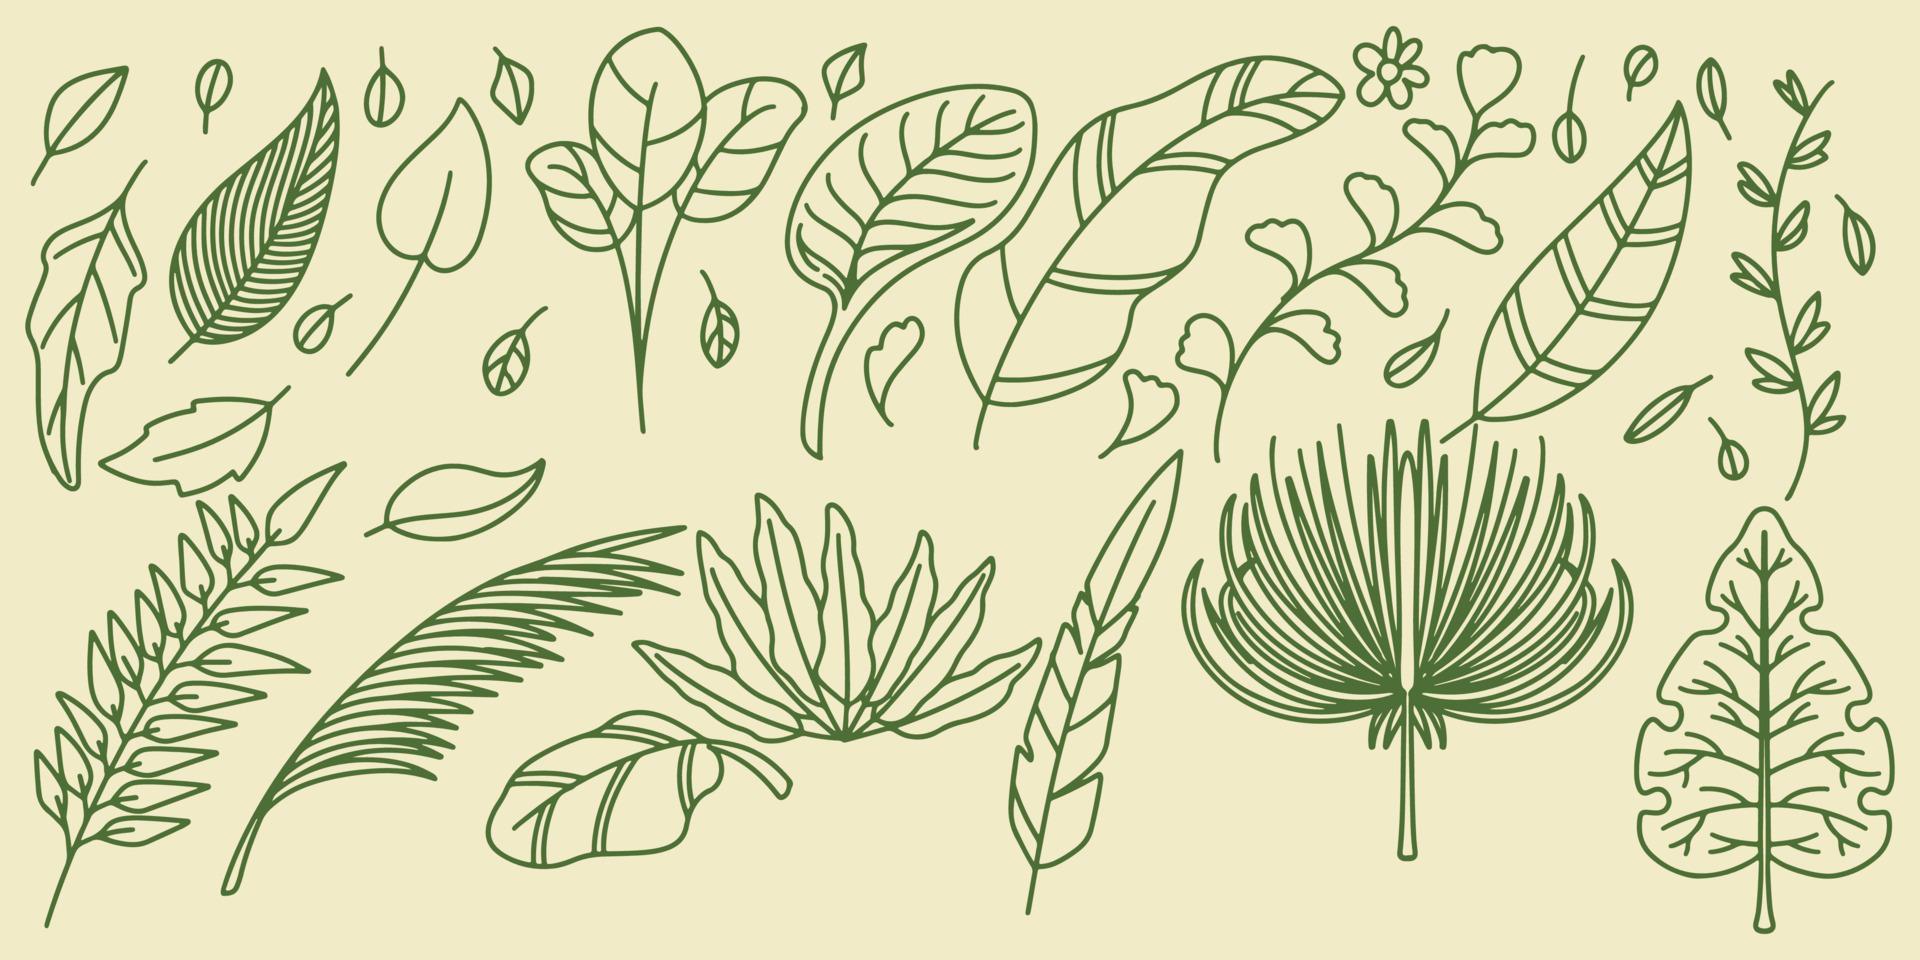 Sixteen Hand drawing set floral botanical fern forest elements vector